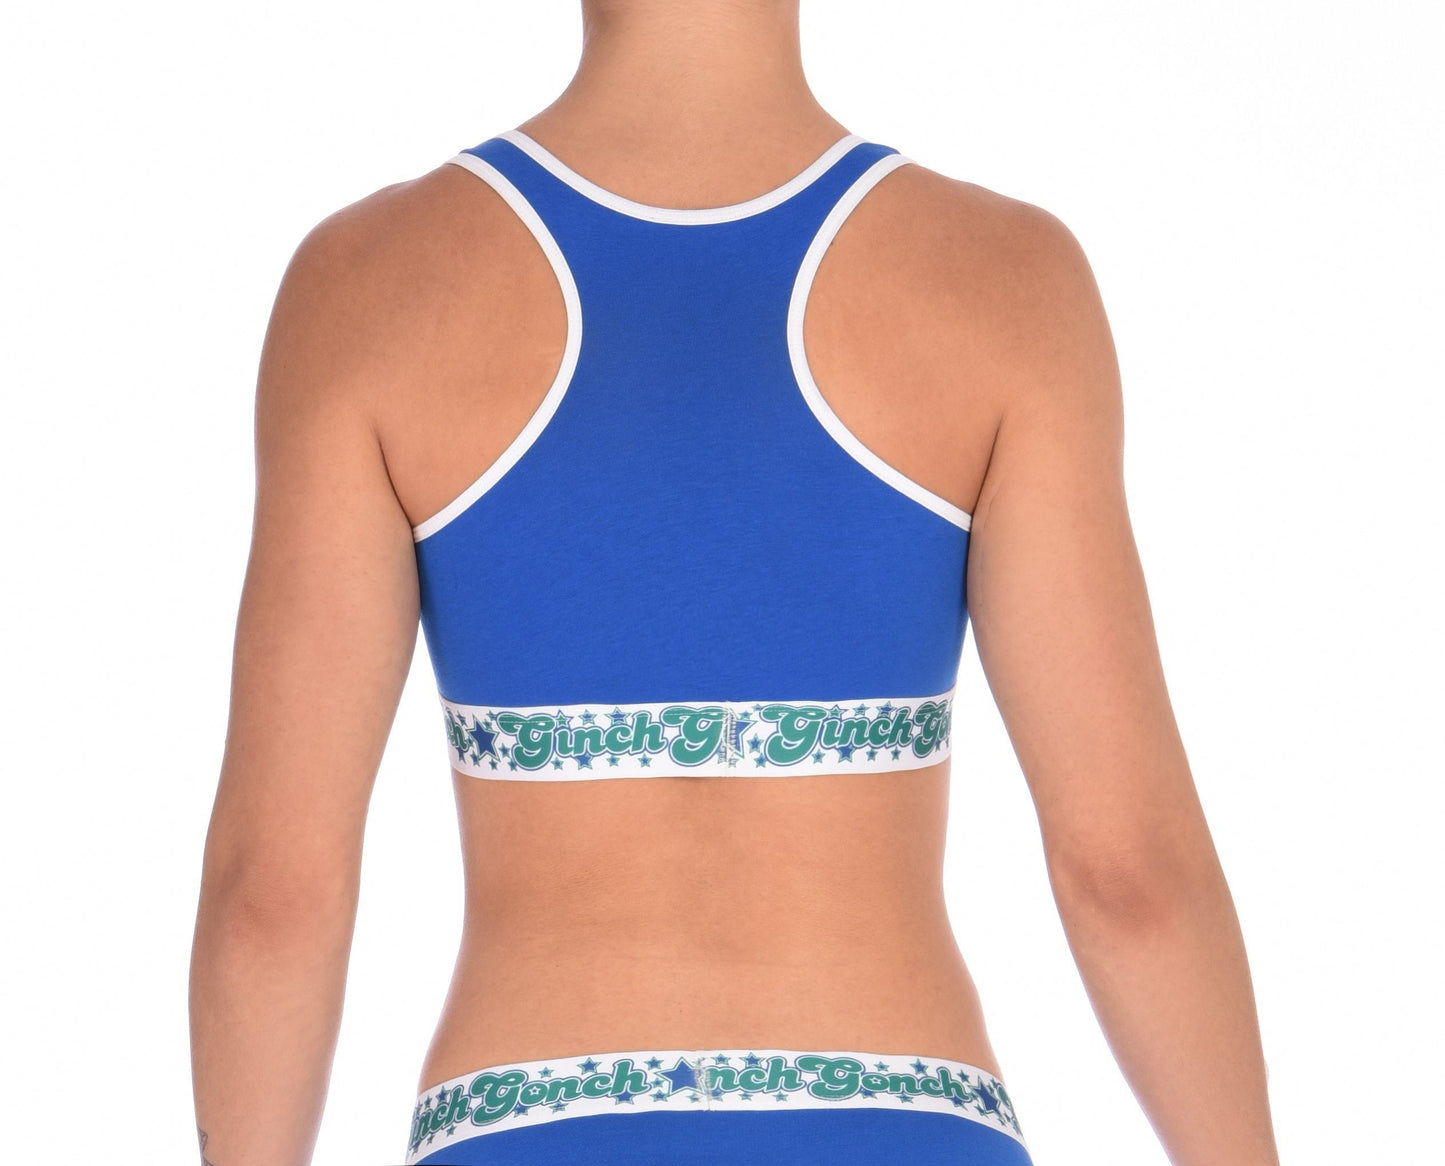 ginch gonch blue lagoon women's sports bra blue fabric with white trim printed thick band with ginch gonch logo and stars in blue and green back